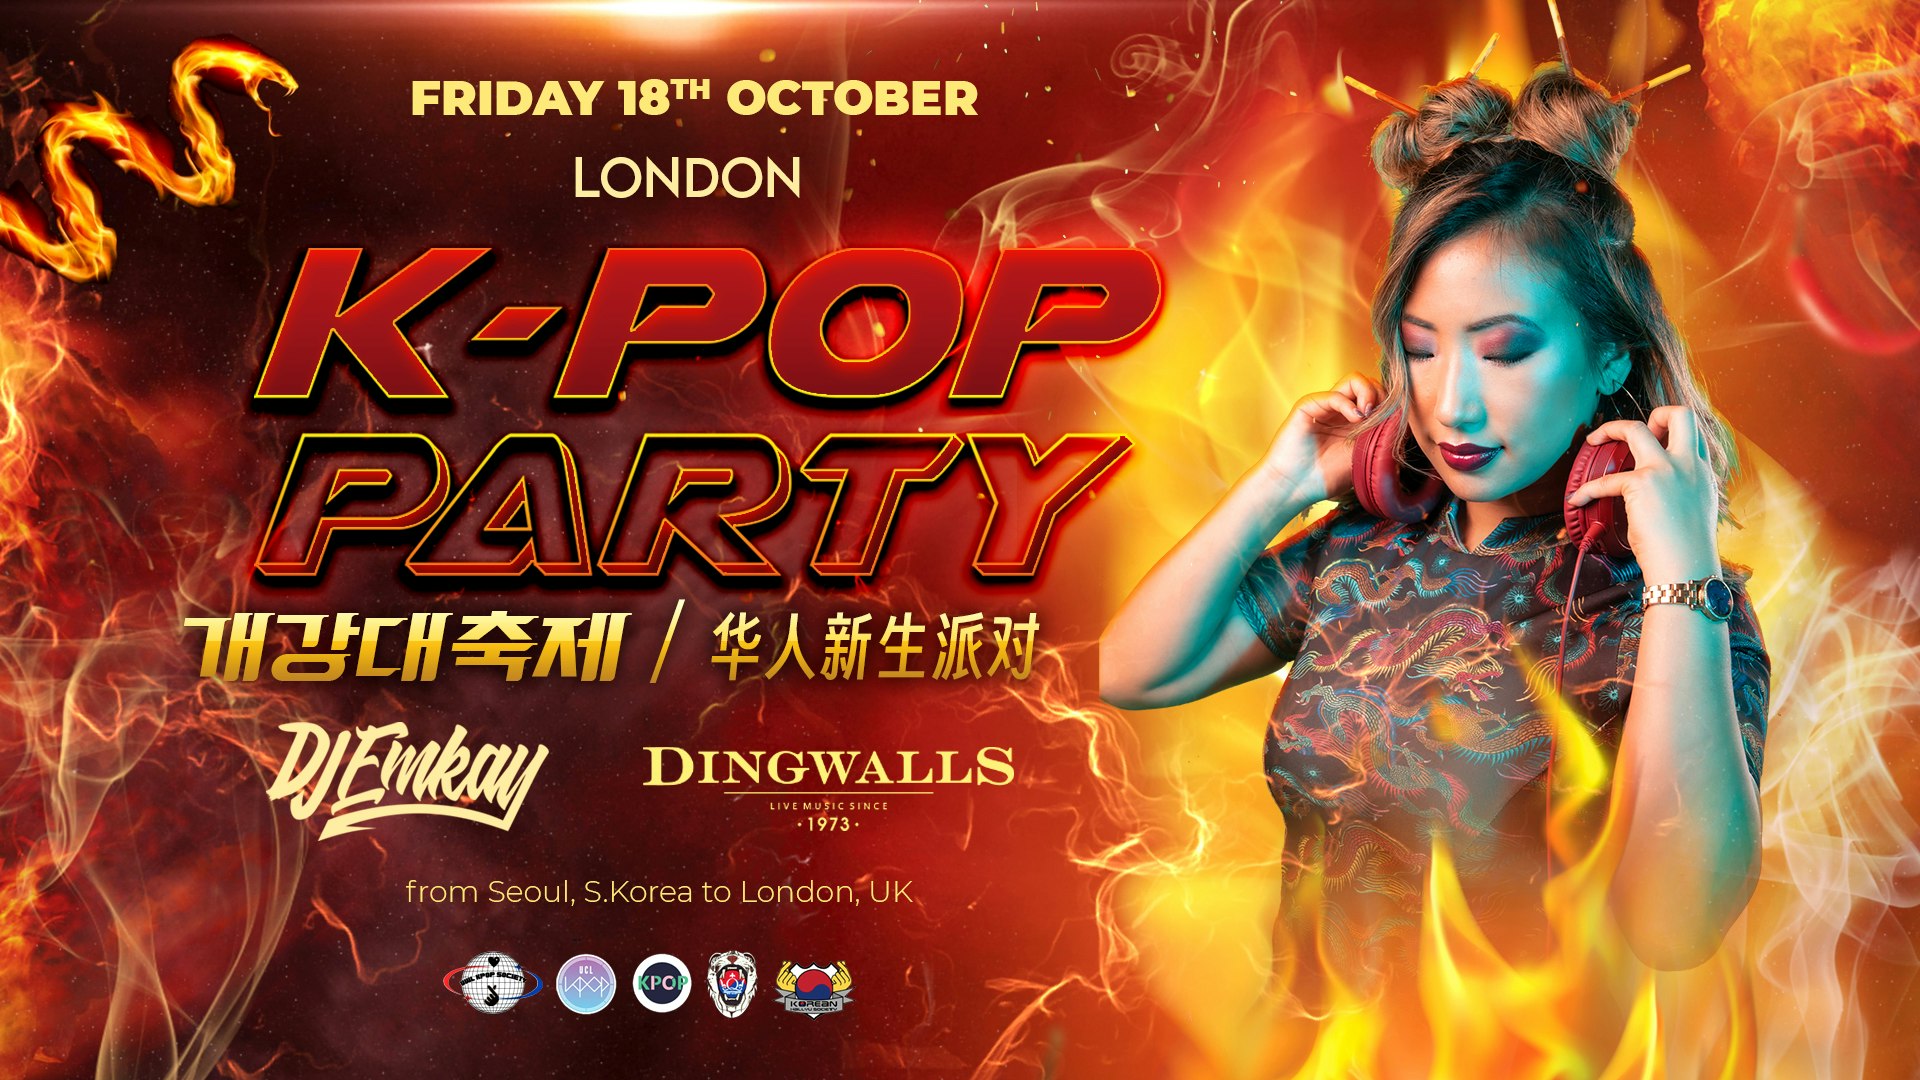 London K-Pop Party – Fire Tour with DJ EMKAY |  Friday 18th October